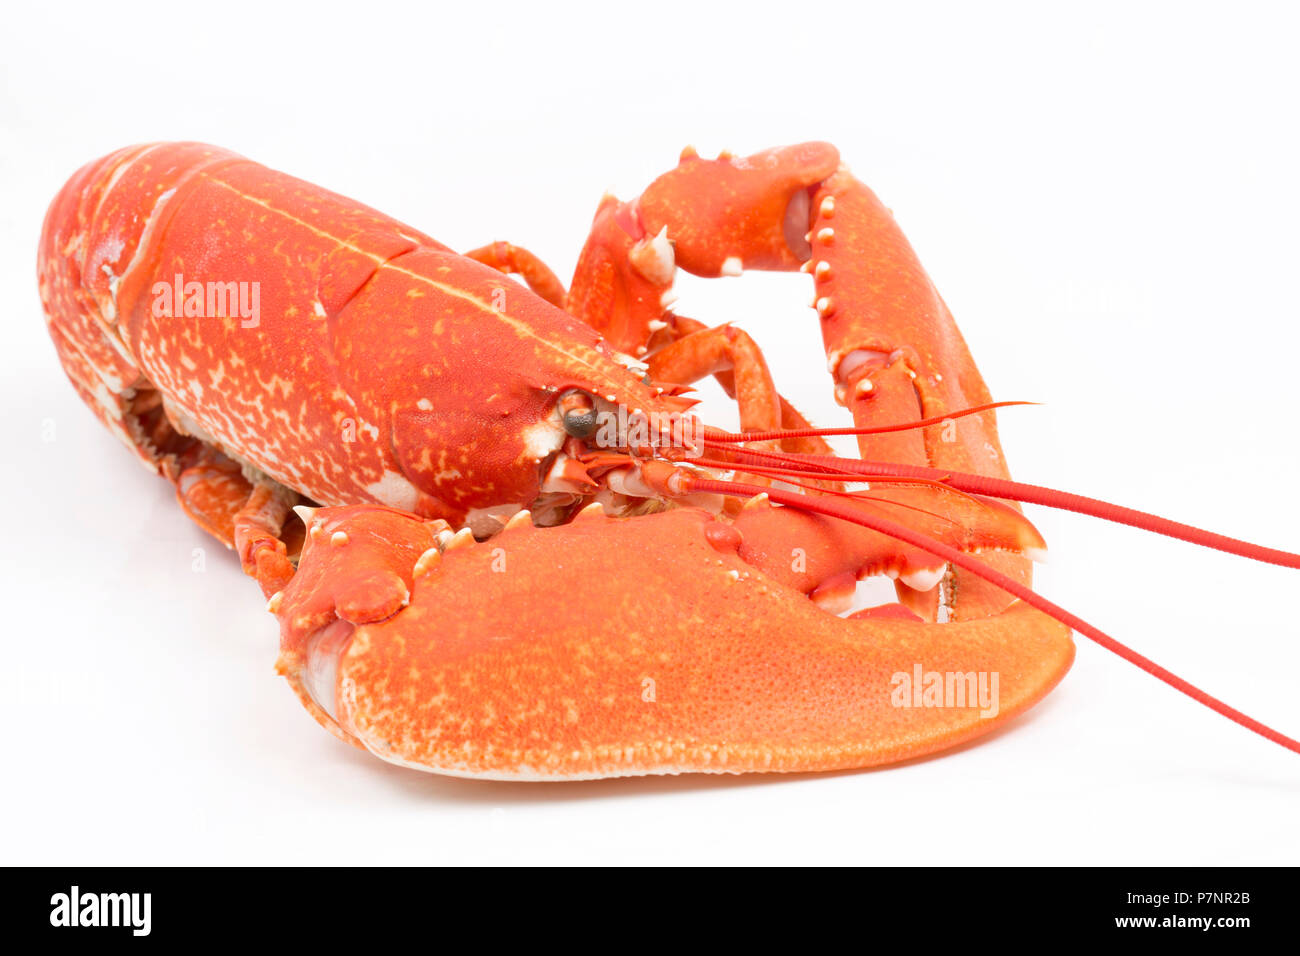 A boiled, cooked lobster, Homarus gammarus,  from the English Channel that has been caught in a pot. Photographed on a white background. Dorset Englan Stock Photo